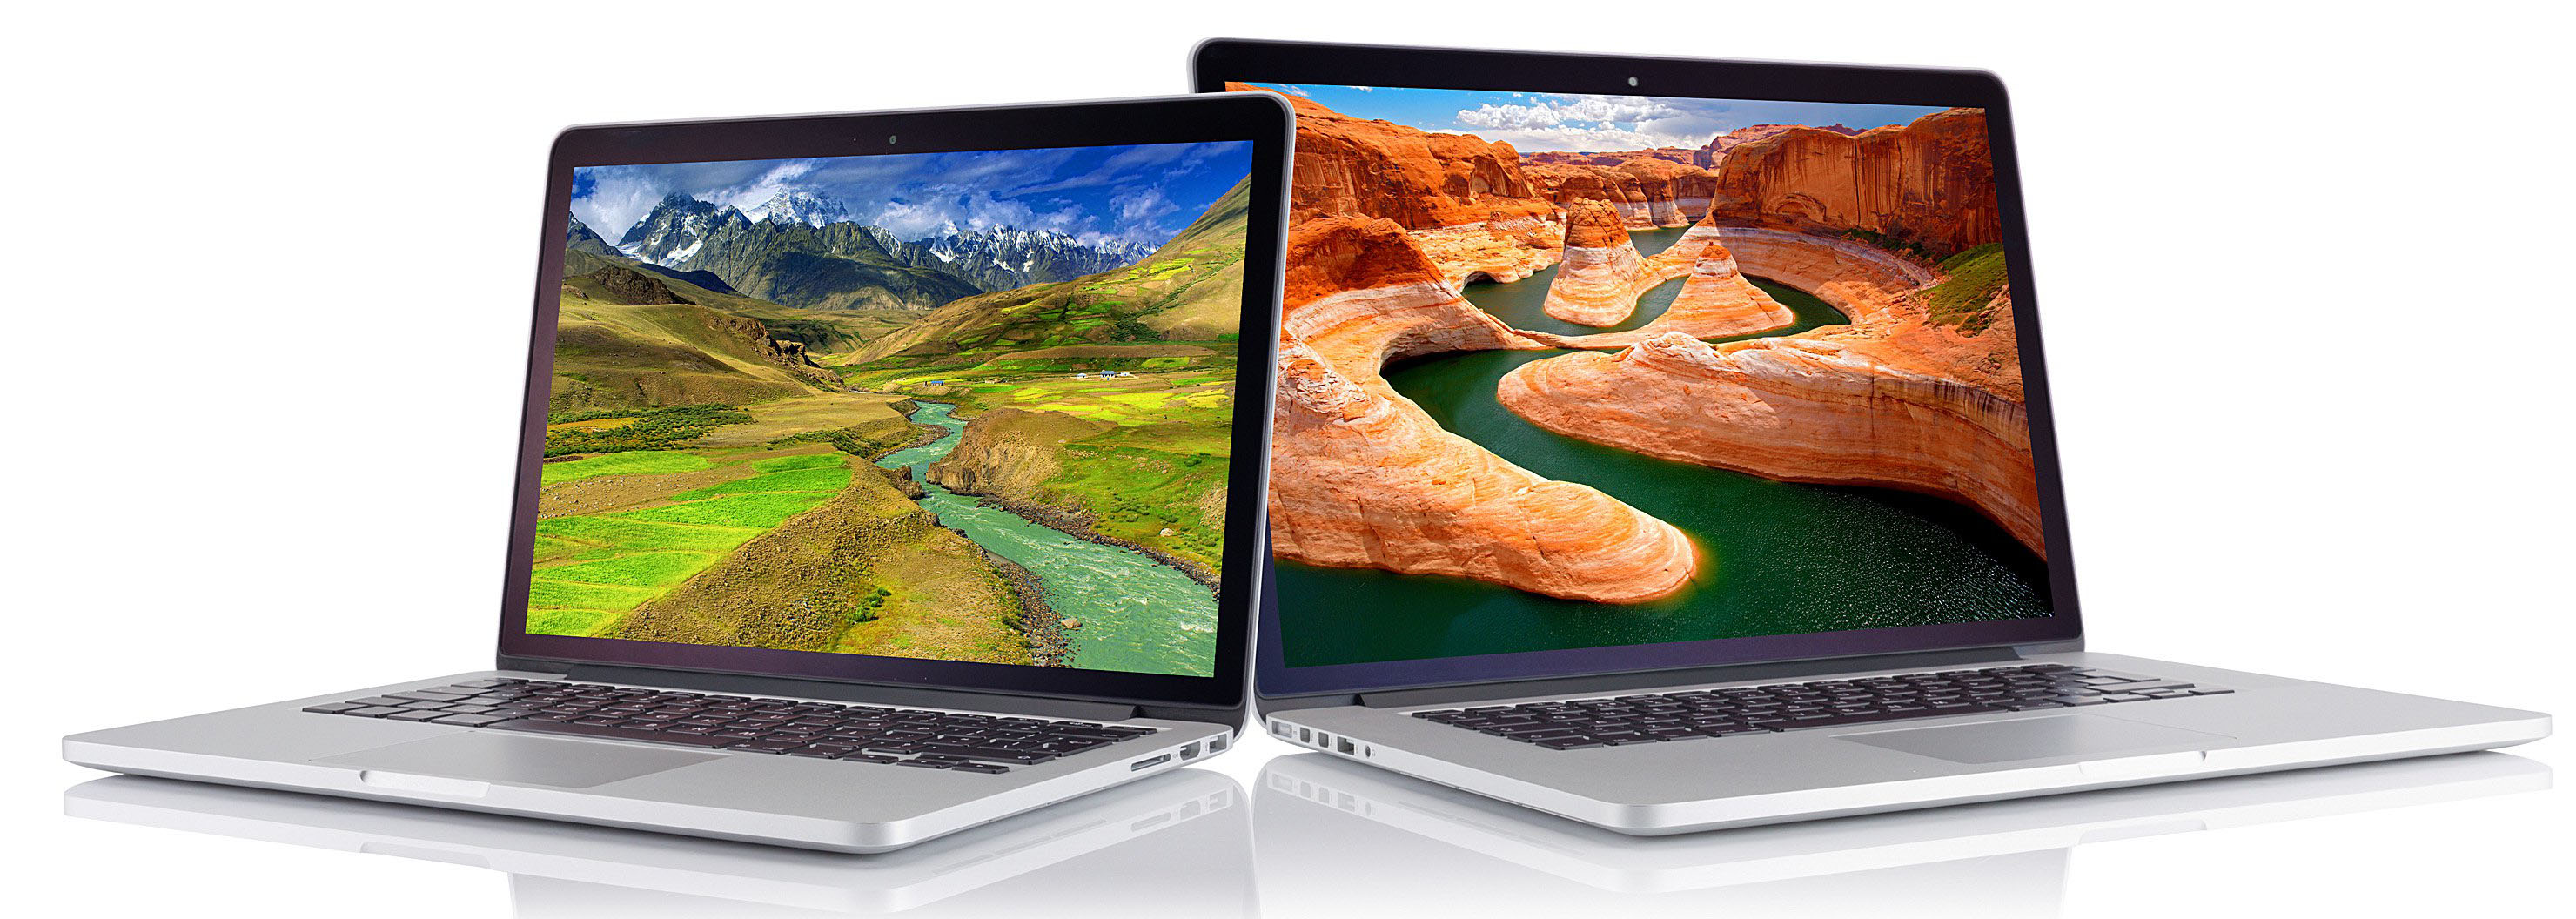 PC/タブレット ノートPC Apple MacBook Pro 13 (Early 2015) - Specs, Tests, and Prices 